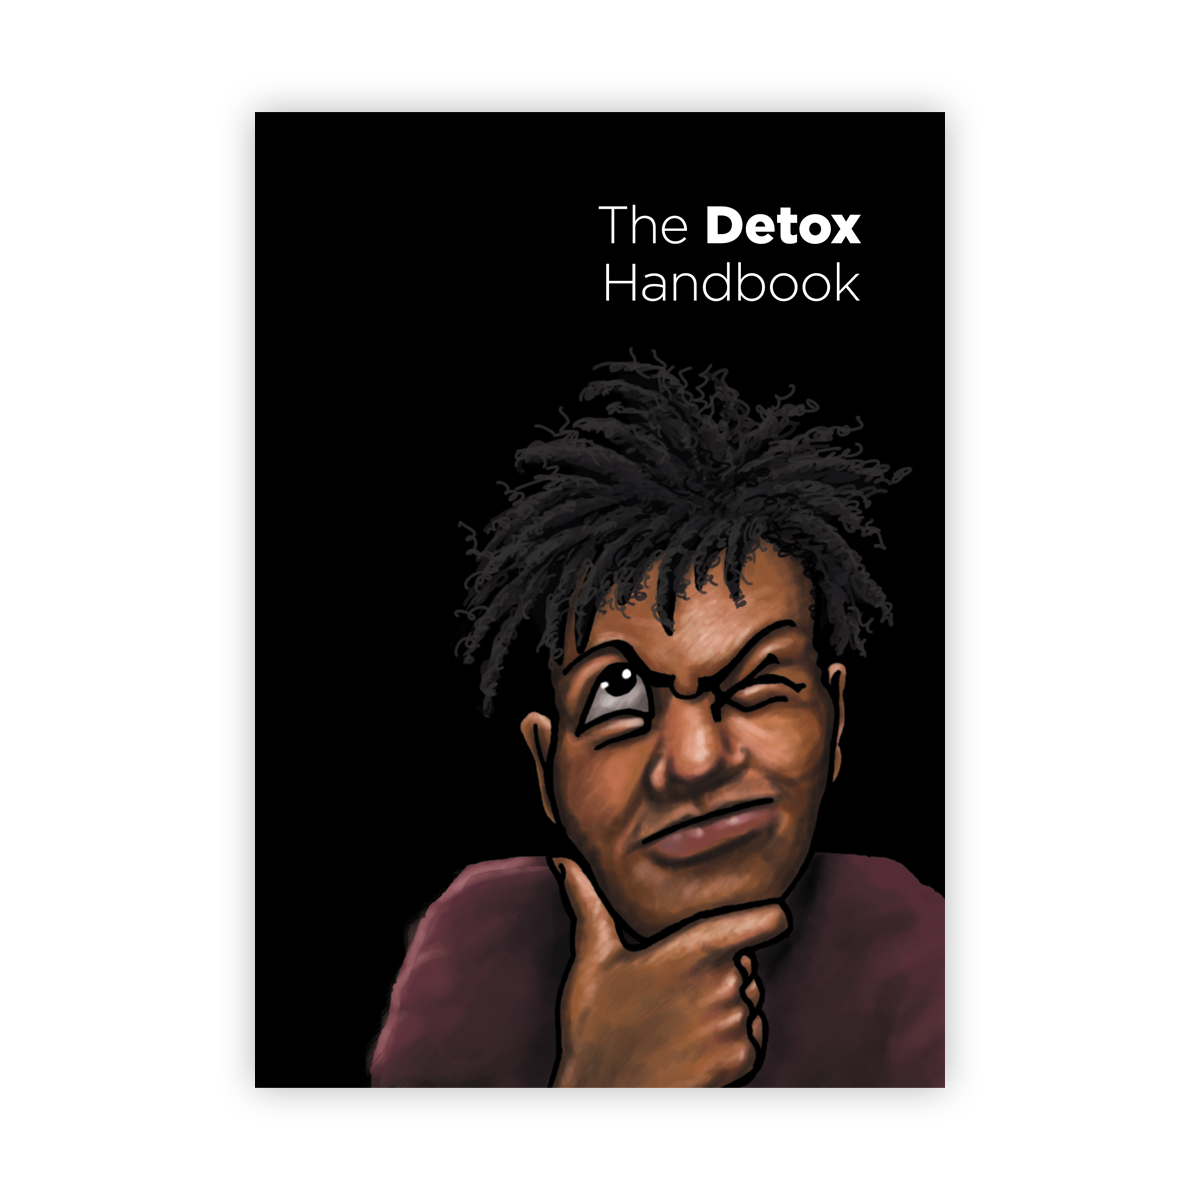 The Detox Handbook - temp out of stock (new edition being written)